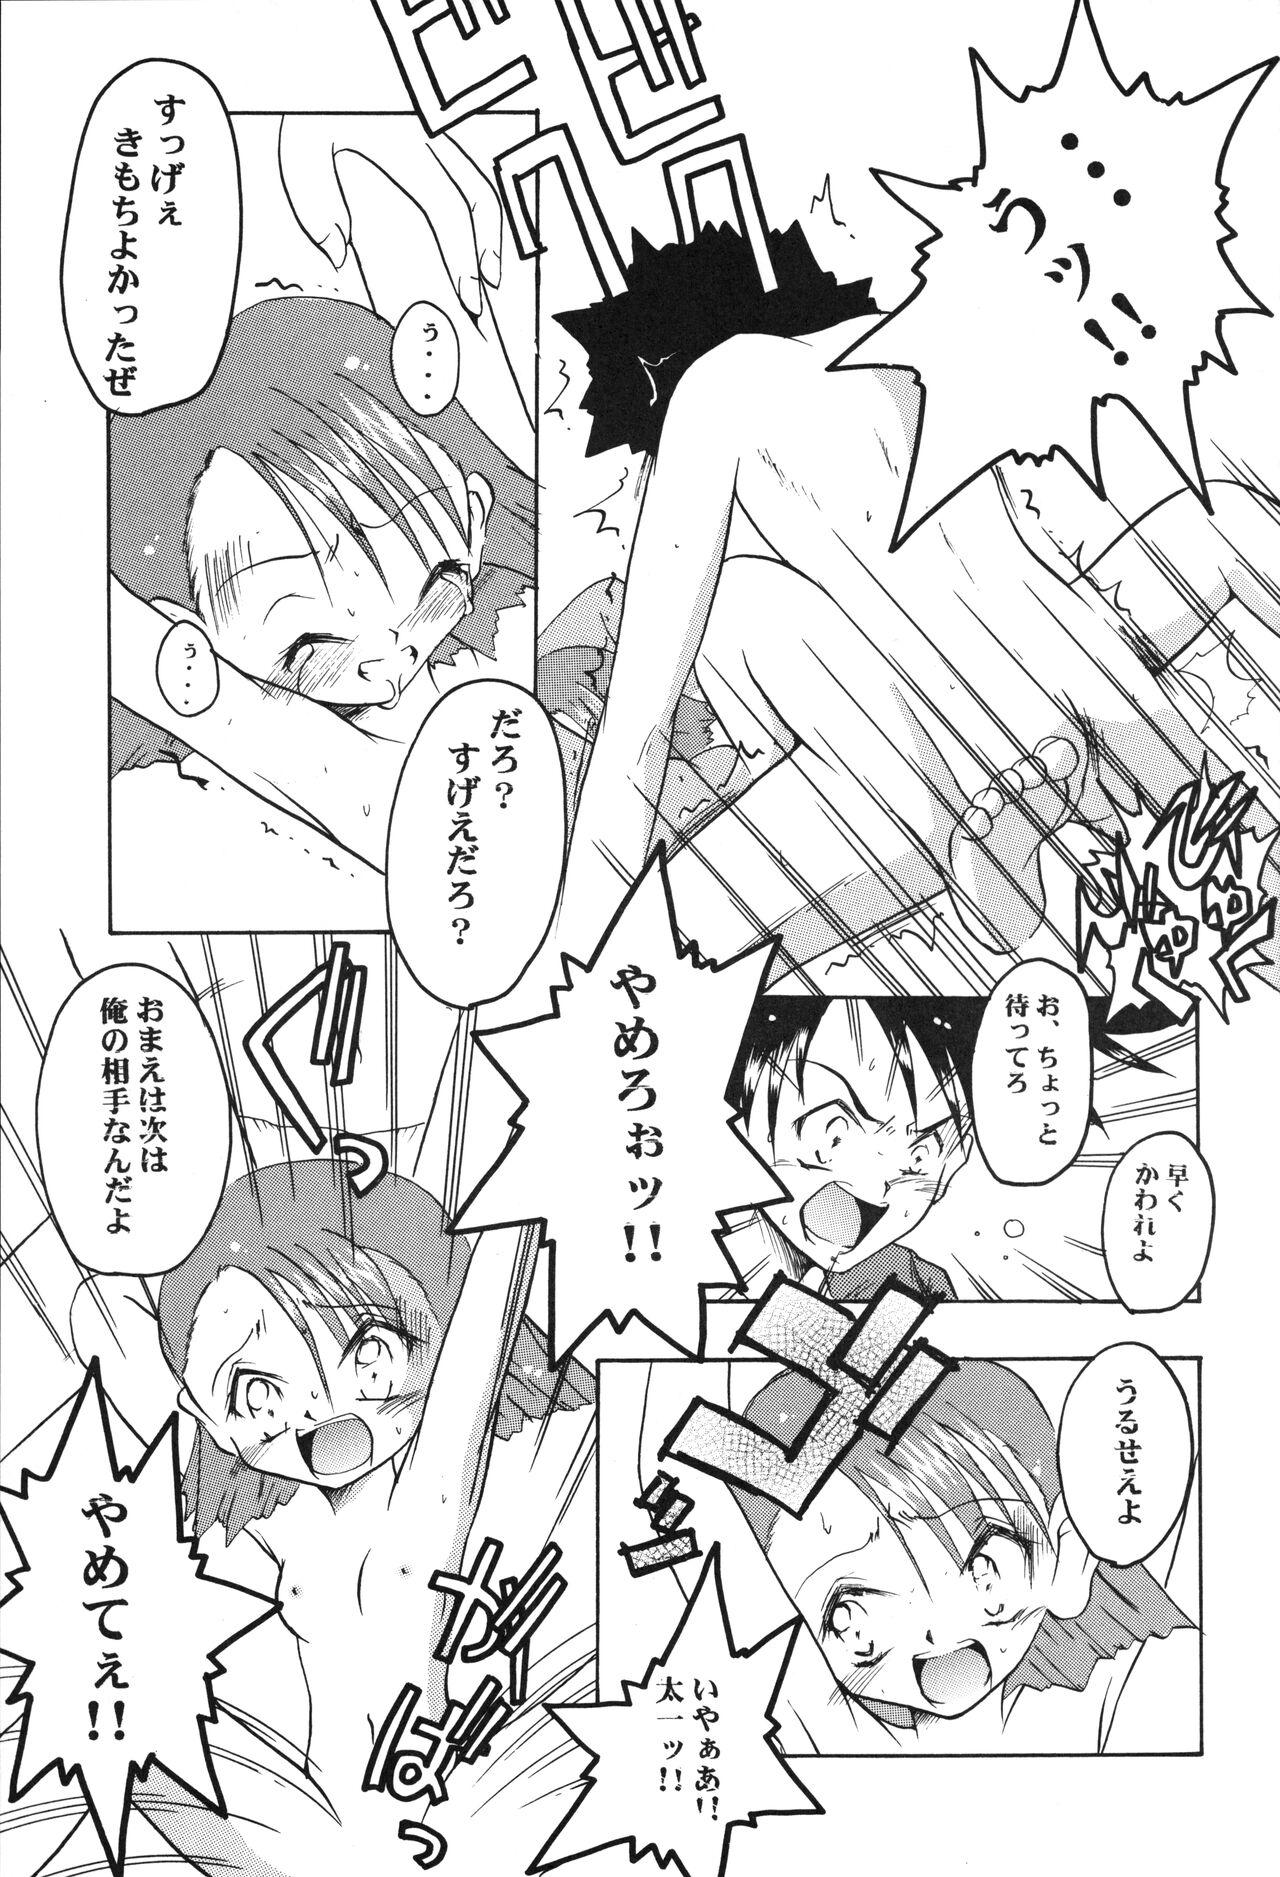 Pantyhose Get Sweet ”A” Low Phone ”DIGIMON ADVENTURE” - Digimon Squirt - Page 9